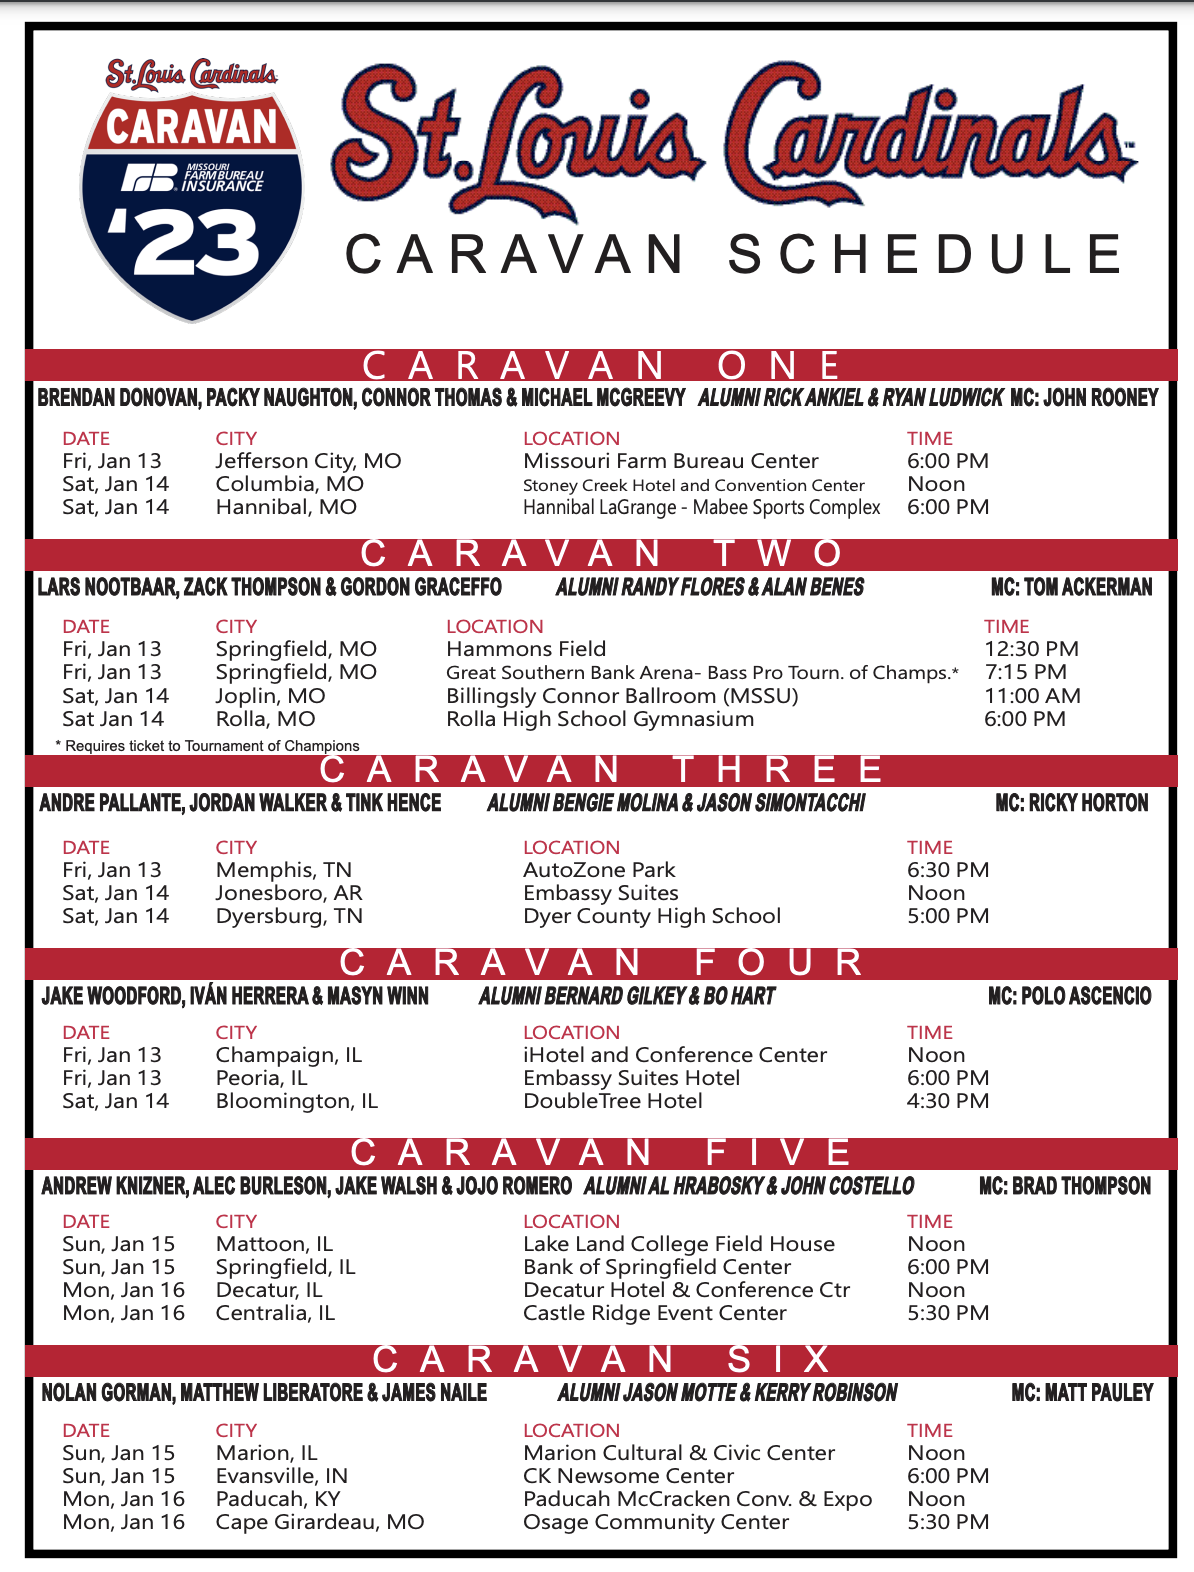 Cardinals Caravan 2023 Schedule is out - News from Rob Rains